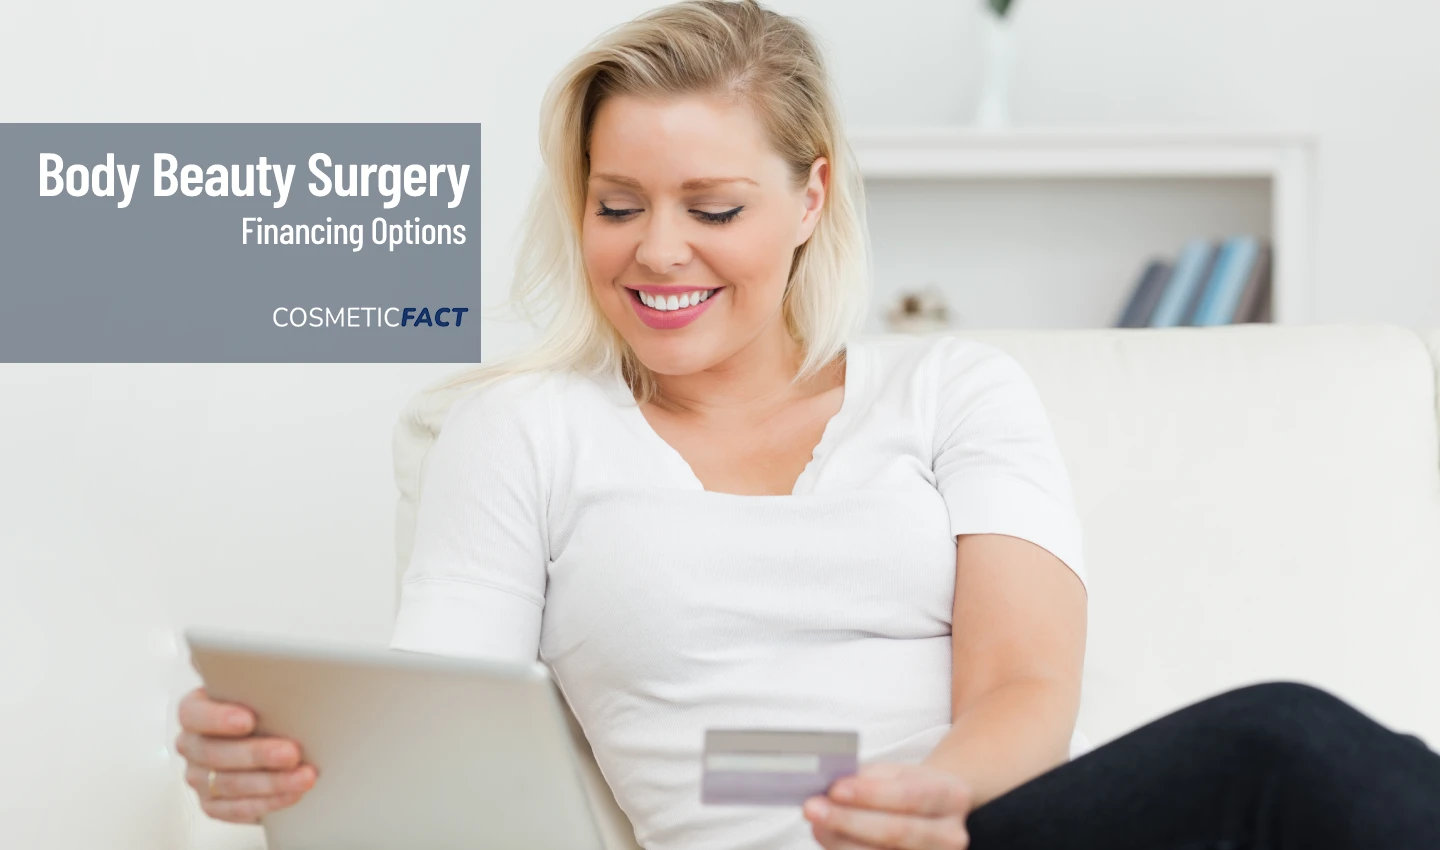 A woman smiles as she holds a bill for body beauty surgery and looks at her credit card.